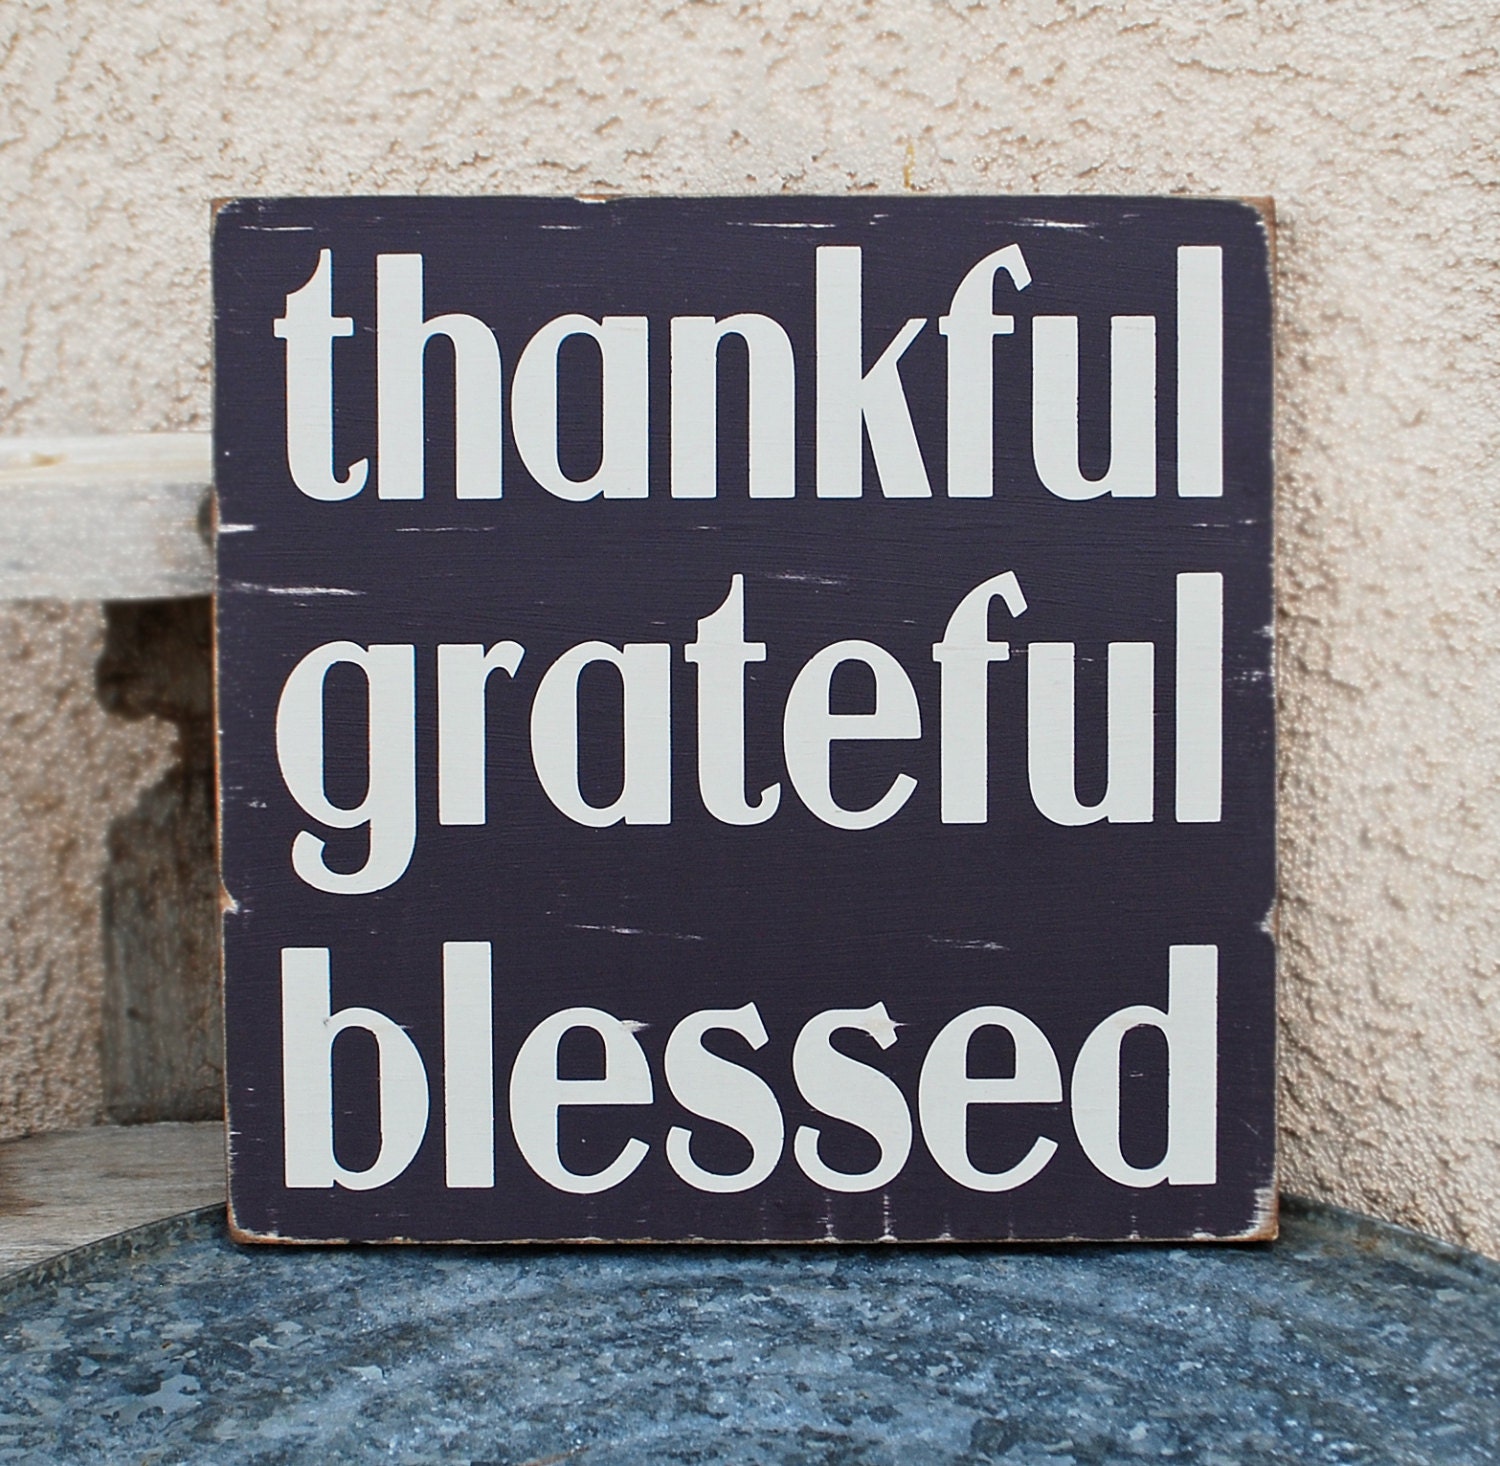 Thankful Grateful Blessed Wooden Sign by snappydesign on Etsy